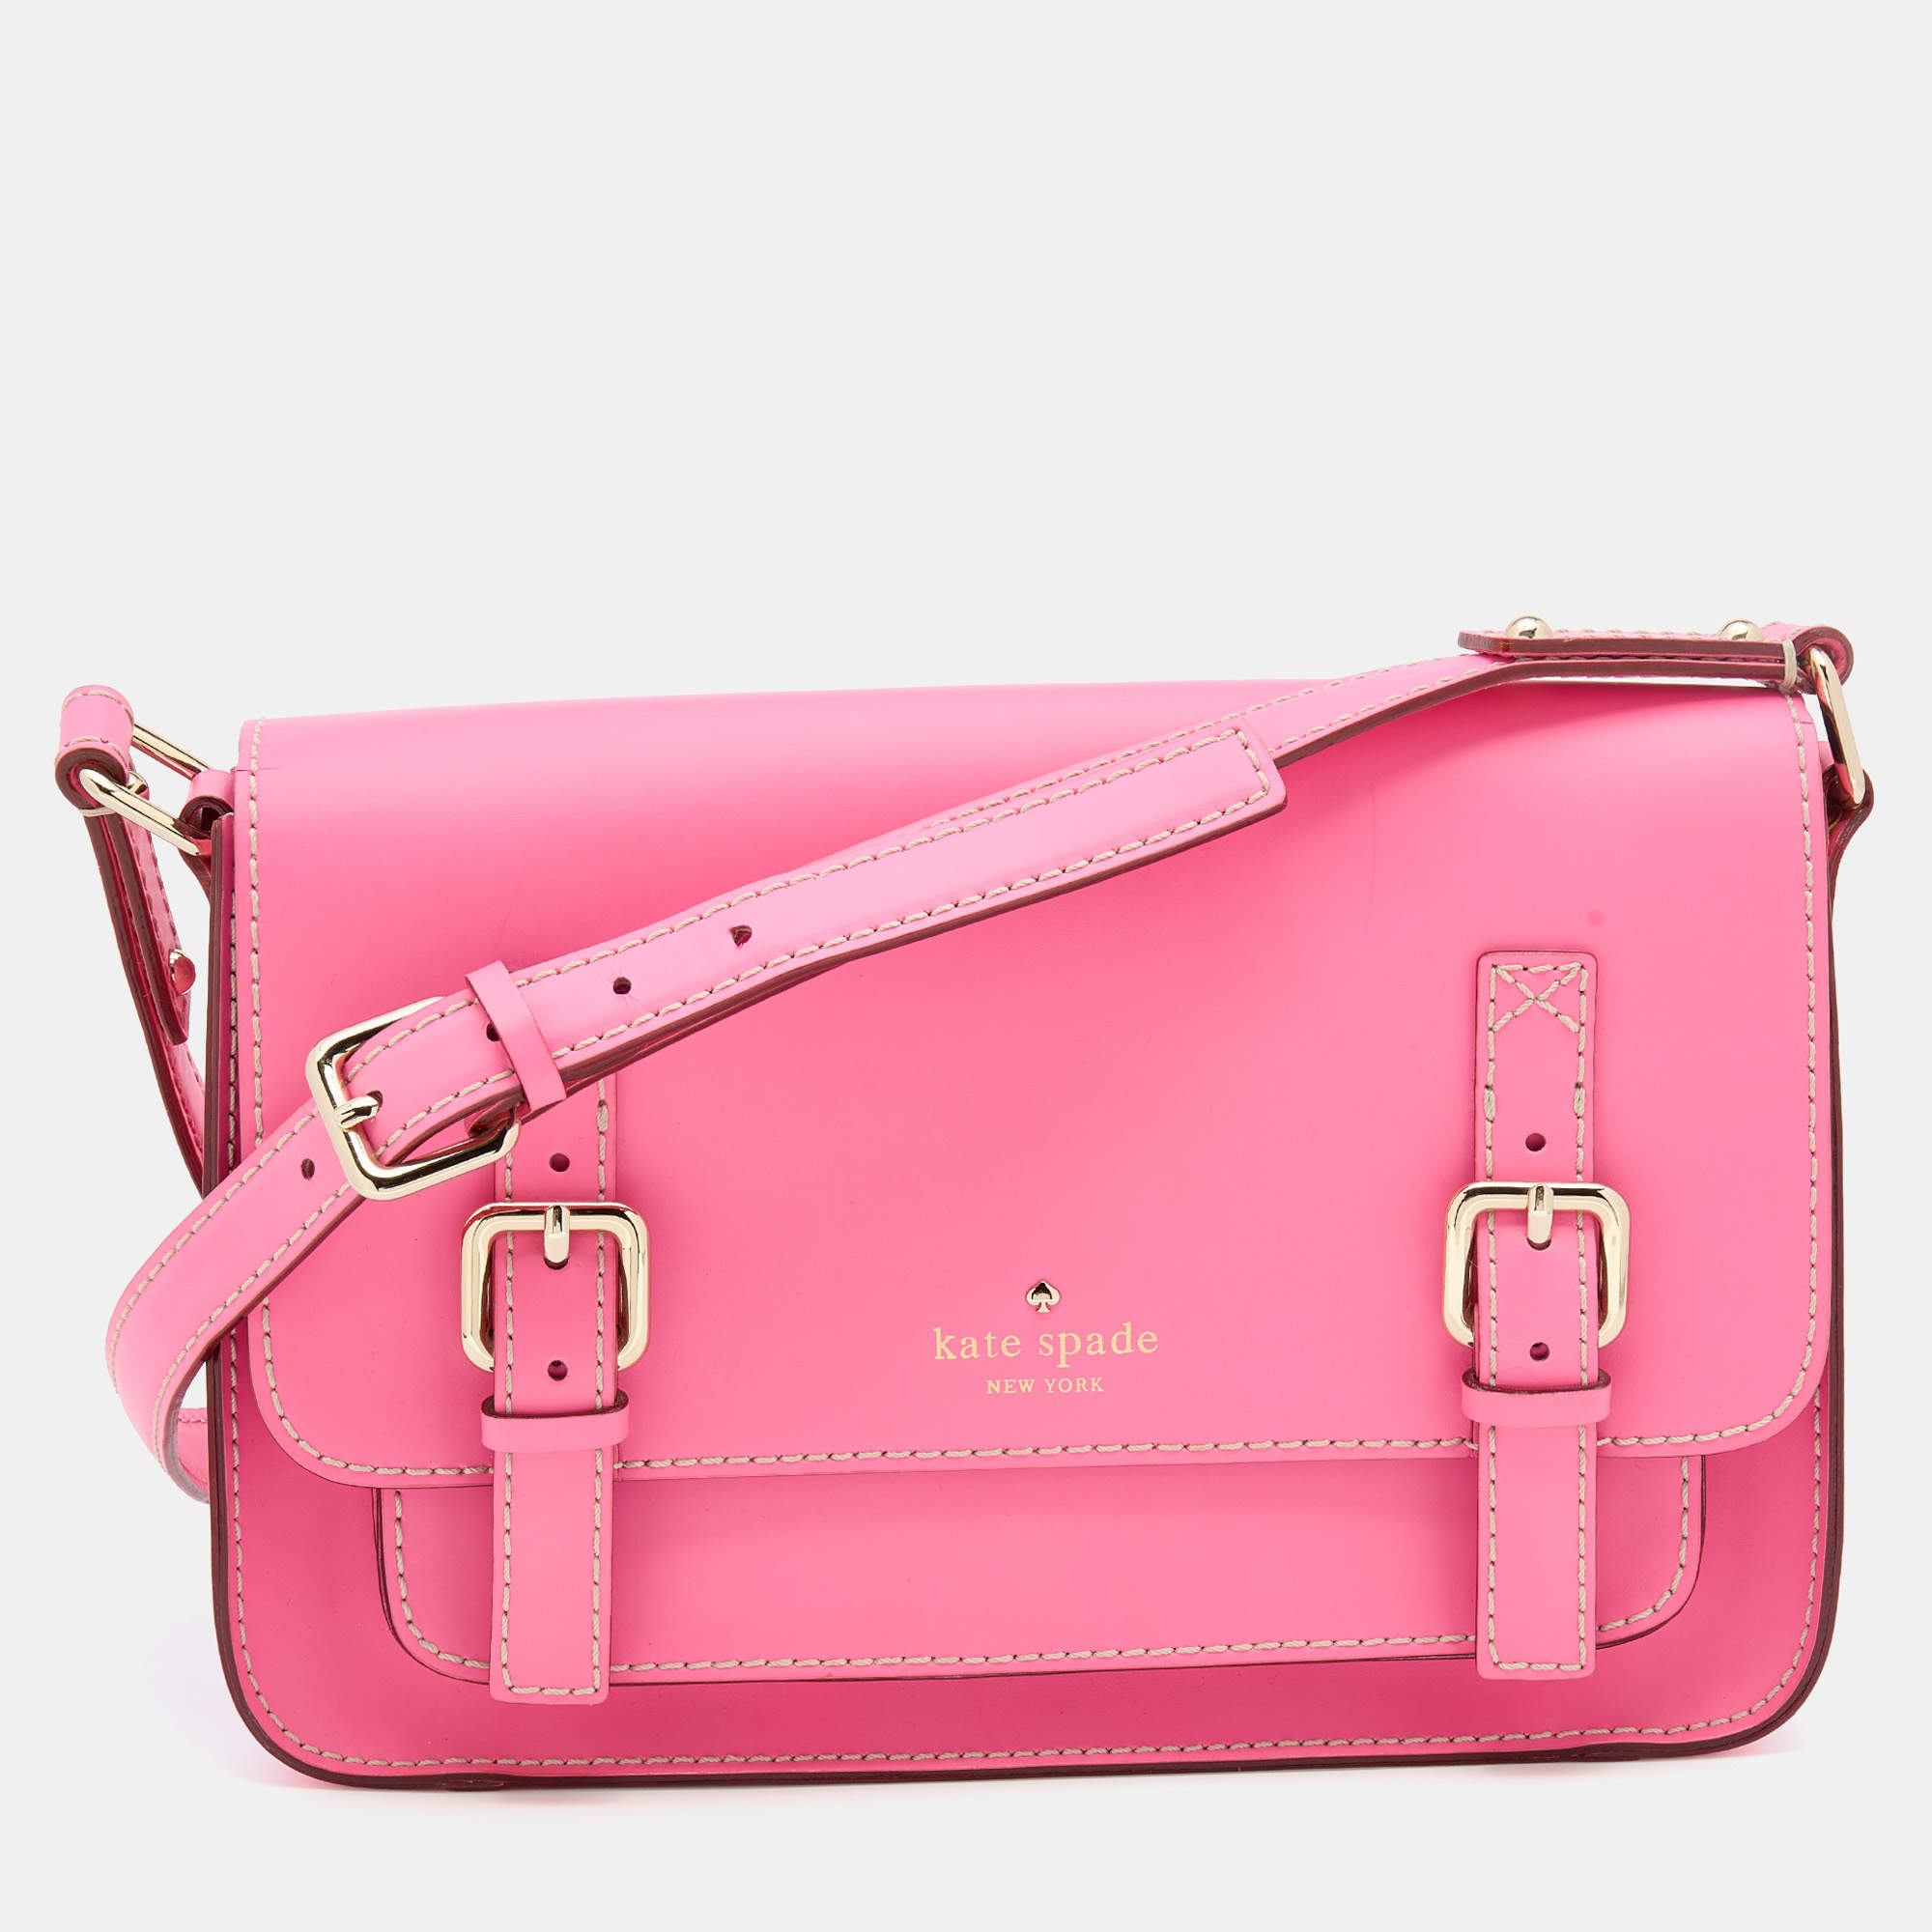 Buy the Kate Spade Women's Pink Leather Crossbody Purse